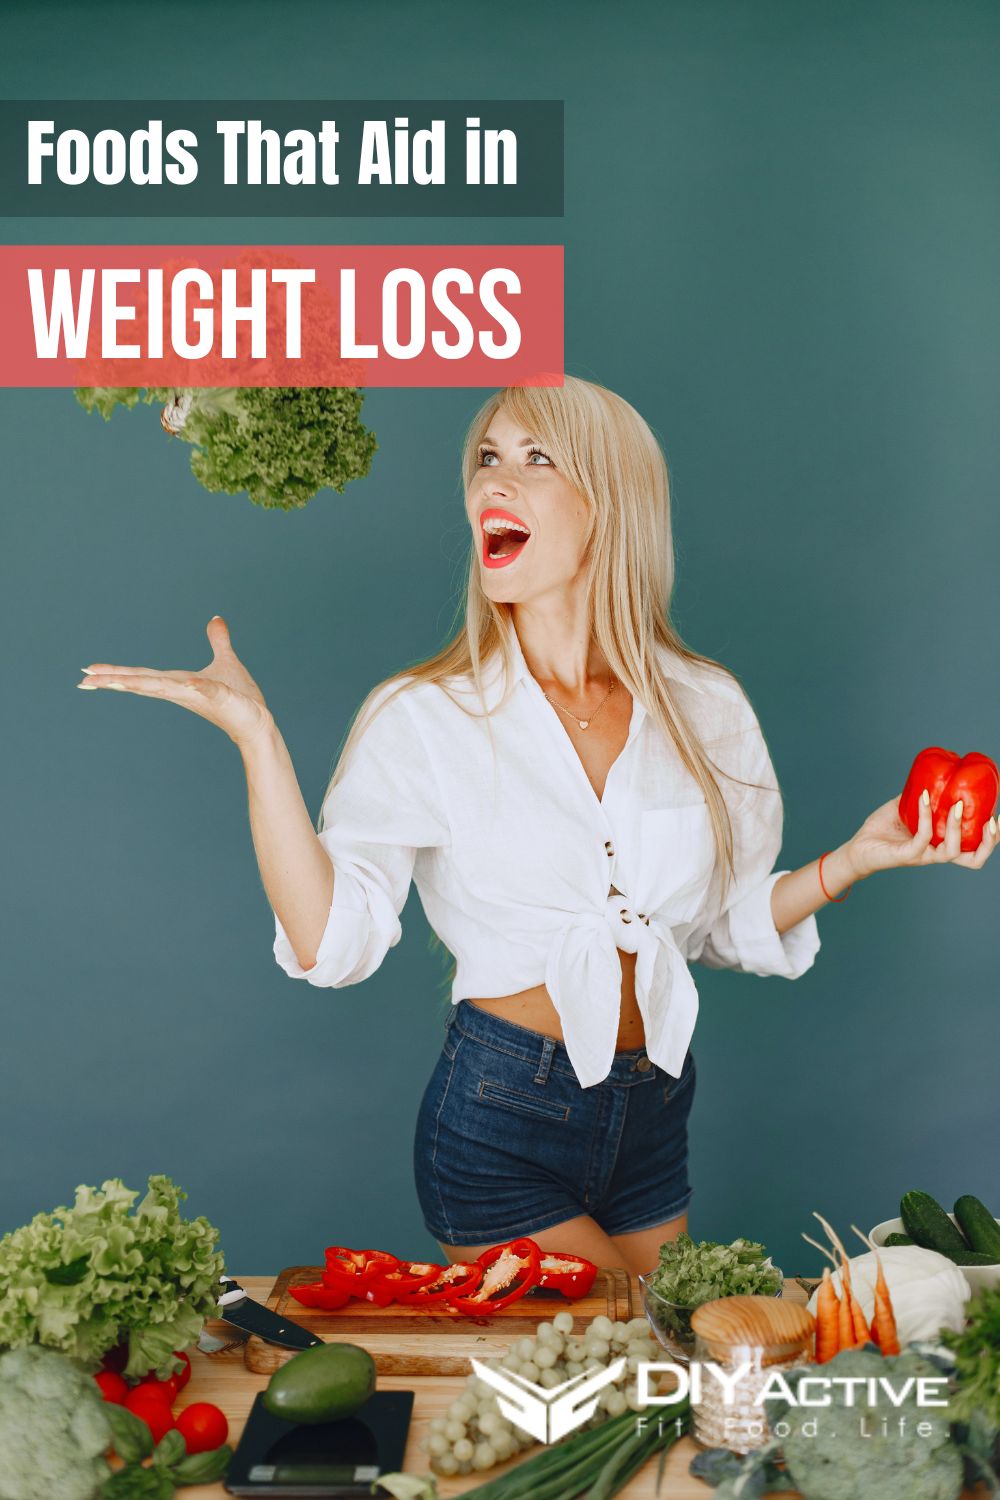 Top 10 Foods That Aid in Weight Loss2